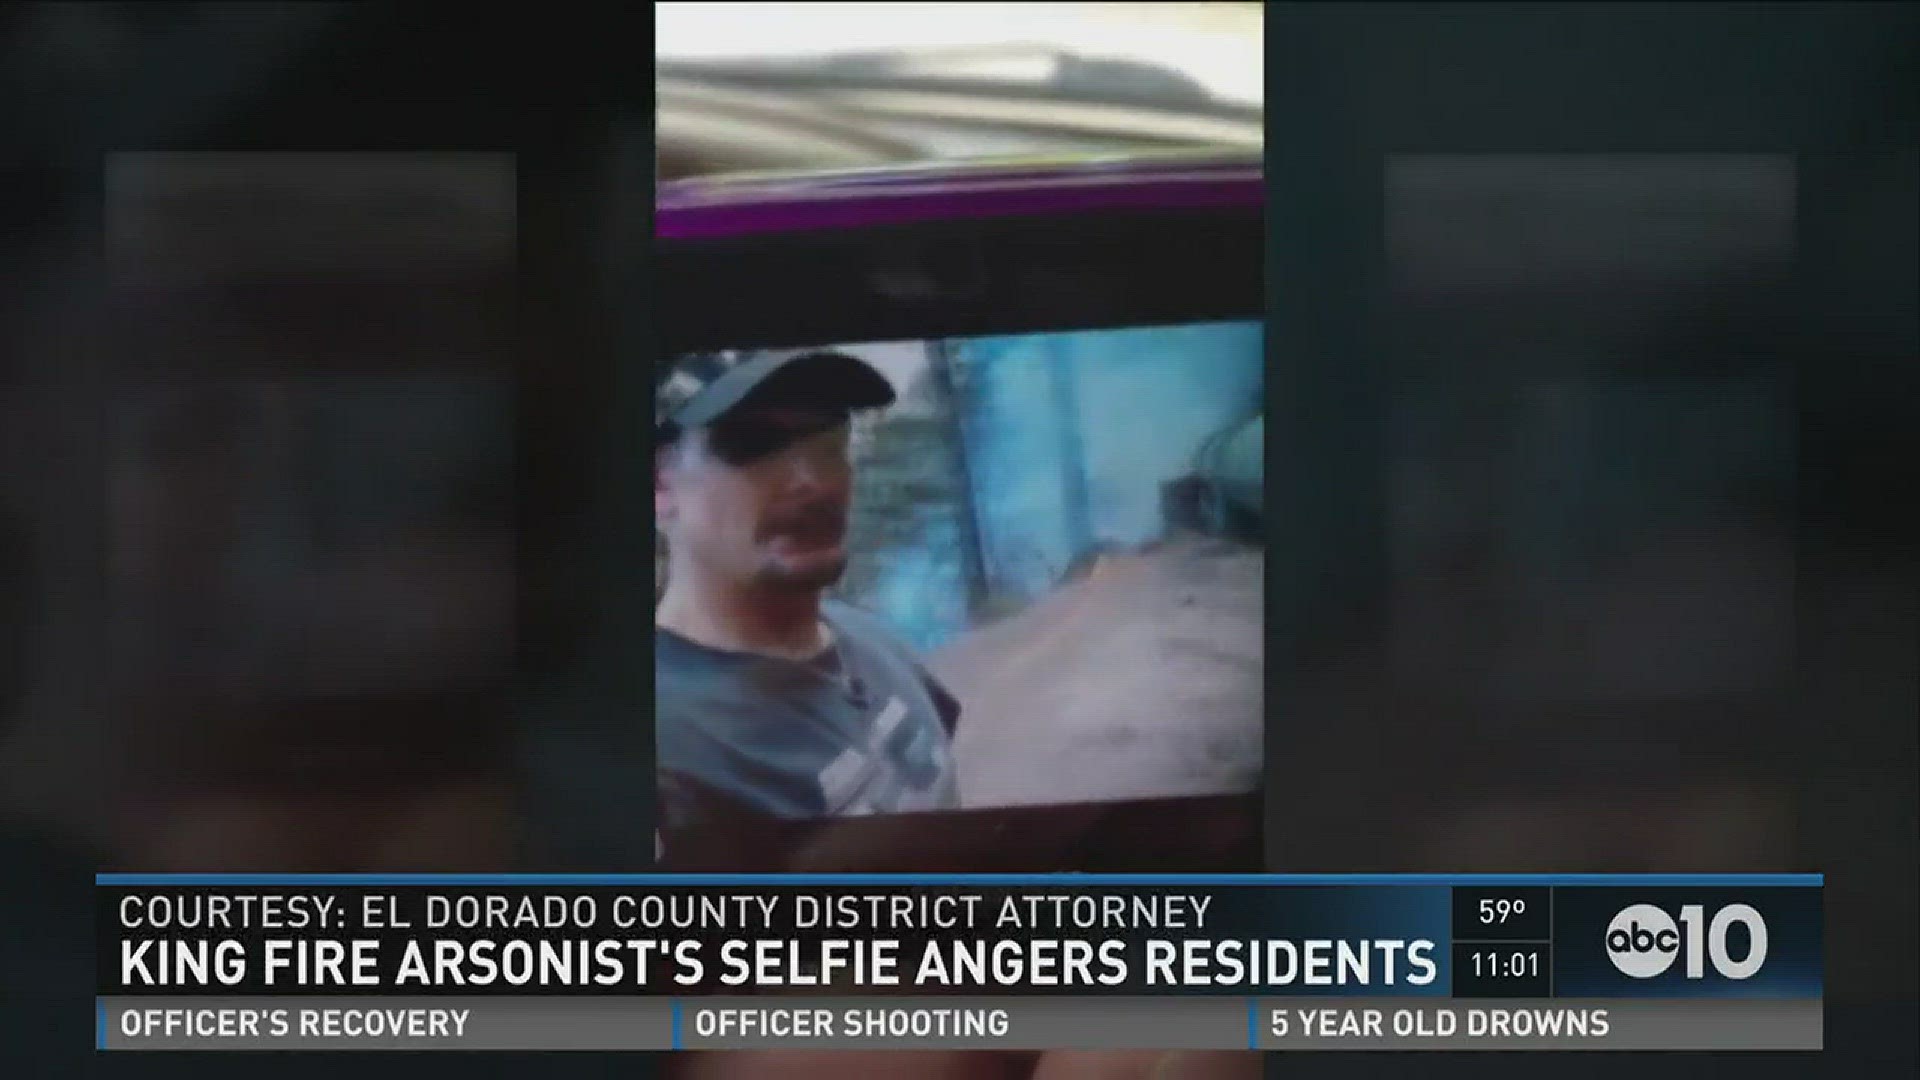 King Fire arsonist's selfie angers residents (April 8, 2016)